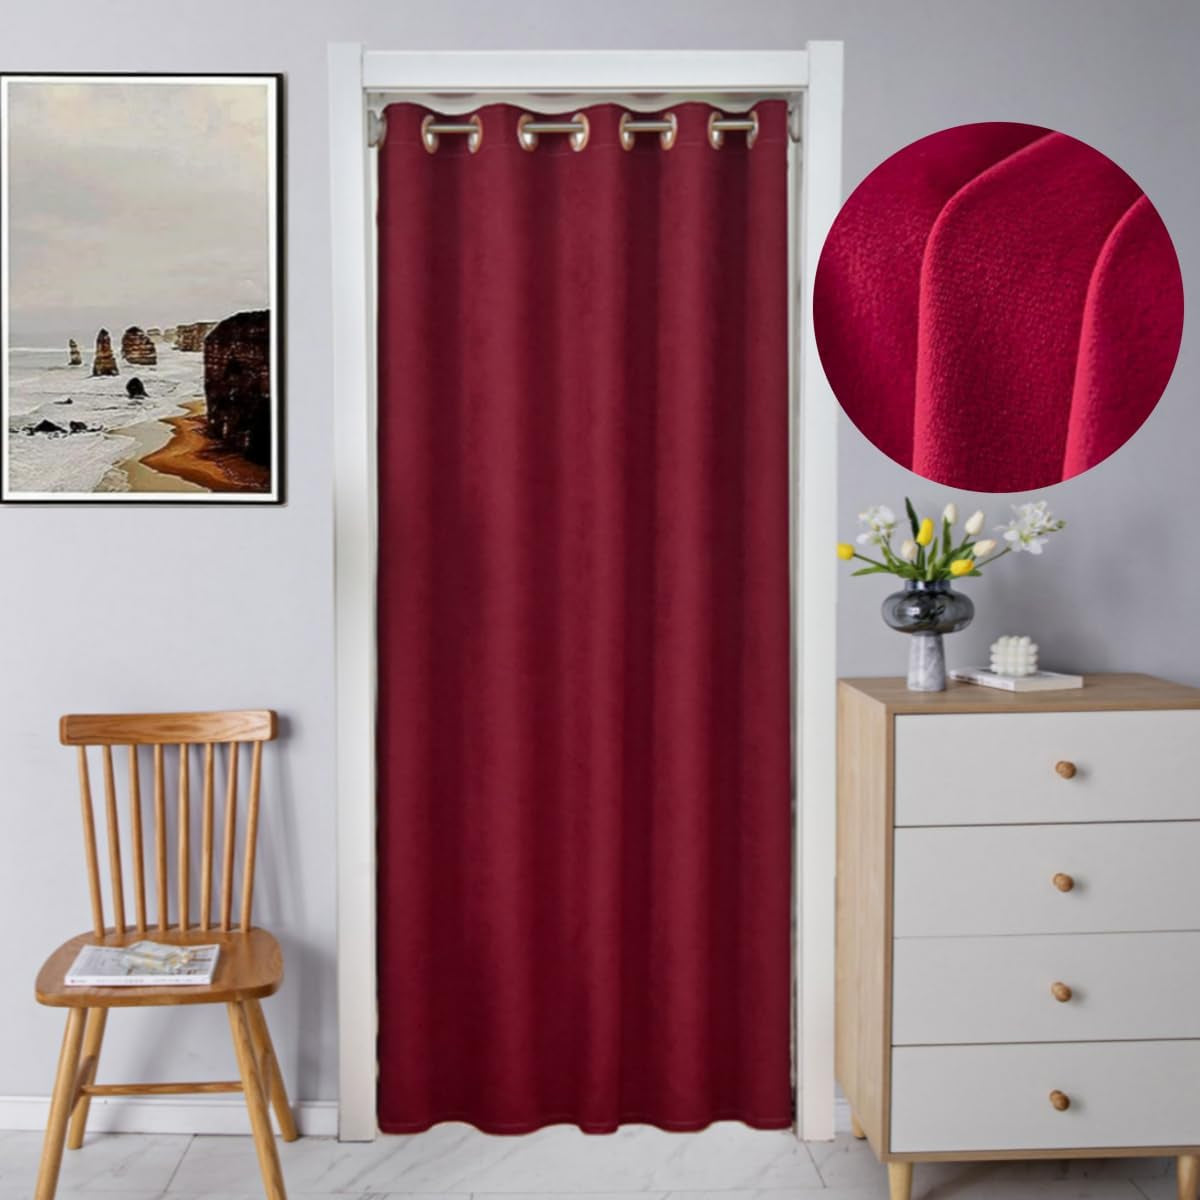 F-CHU Boho Door Curtains for Doorways Privacy,Room Divider Curtains, Insulated Curtains,1 Panel 47X79 Inch,Suitable for Door Width27-39Inch (NOT Include Rome Bar, Telescopic Rod)  F-CHU Burgundy Velvet W47 X L79Inch 